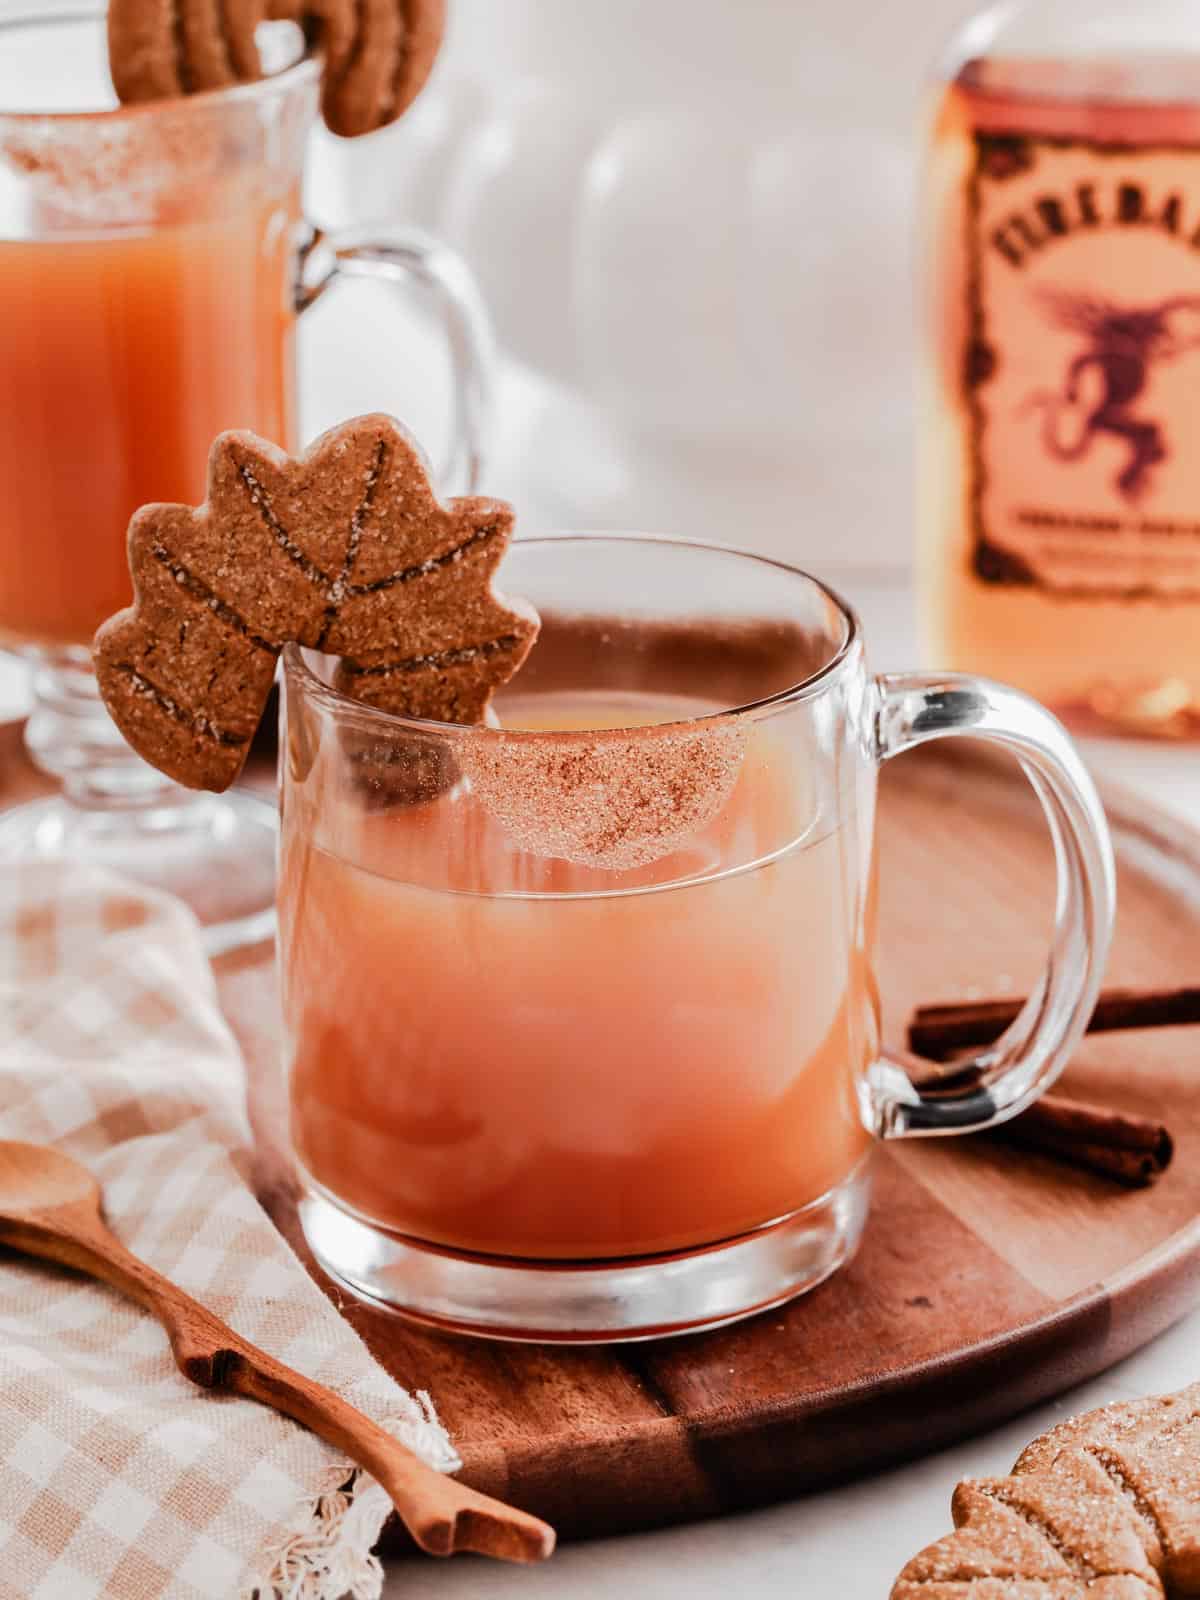 hot cider garnished with cookie on rim of glass mug, with Fireball bottle in background.